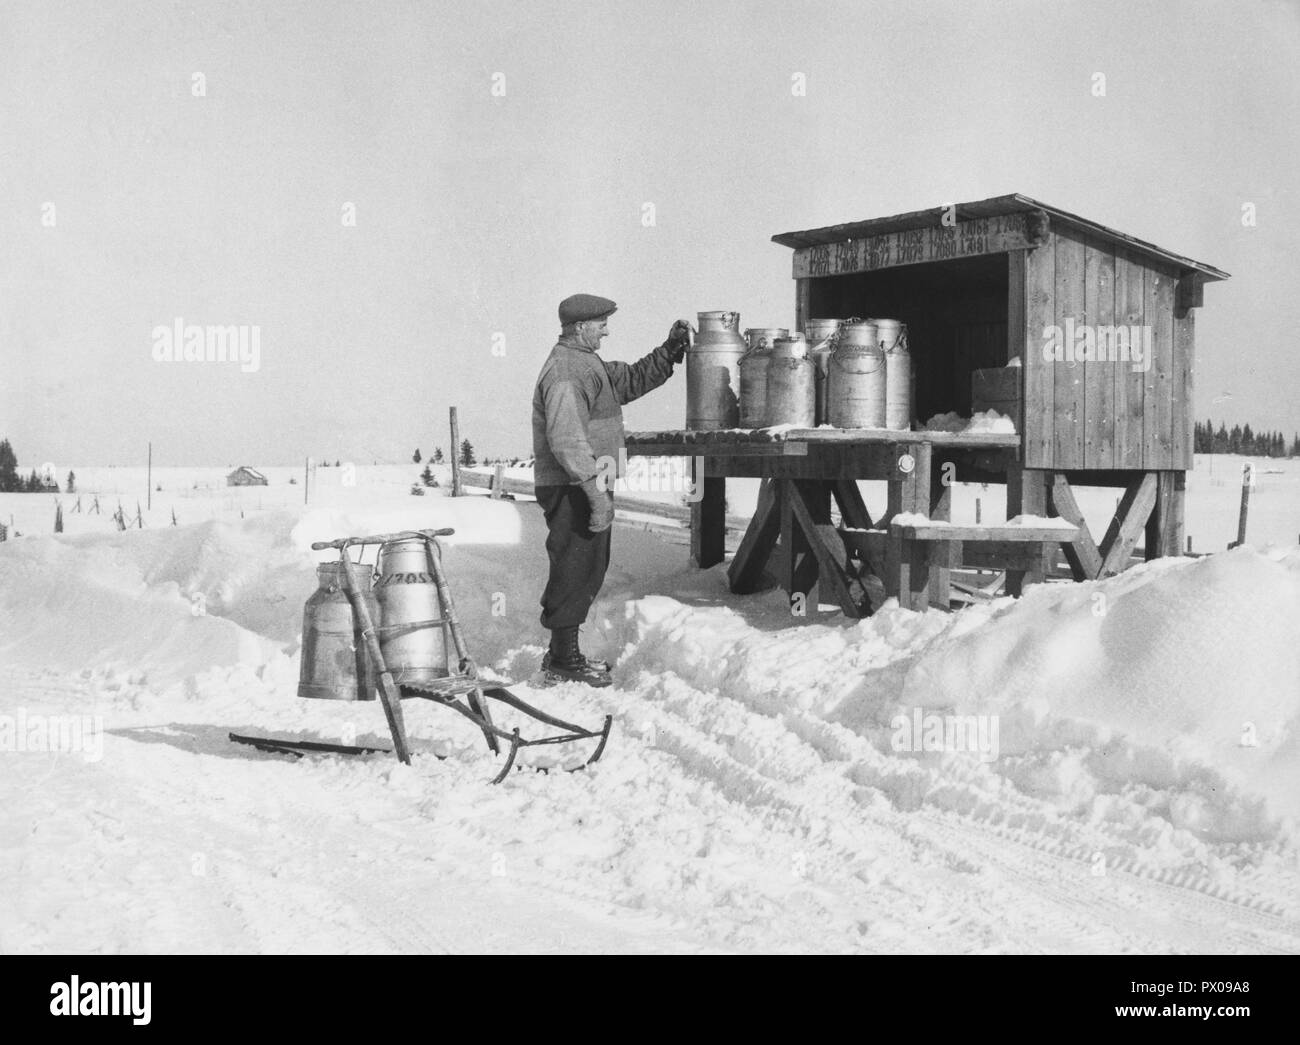 Milk in the 1950s. A milk farmer at the loading deck at the roadside where the milk cans are transported to and from the dairy. He collects the returned empty ones and takes them home this snowy day on his kicking sledge. Sweden 1950s. Stock Photo